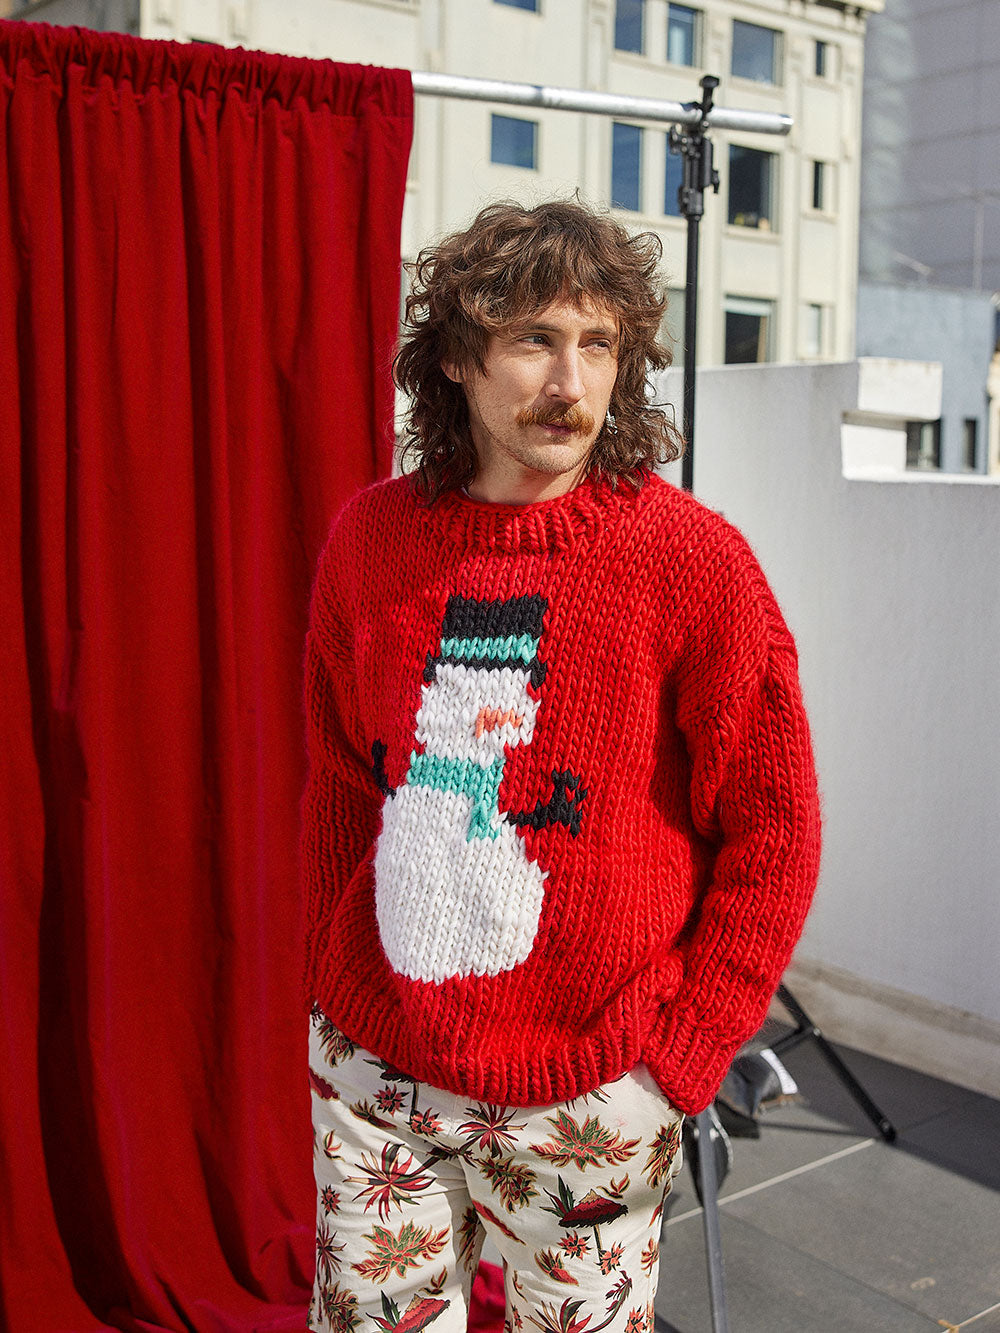 Knit your own Snowman Christmas Sweater with Cardigang